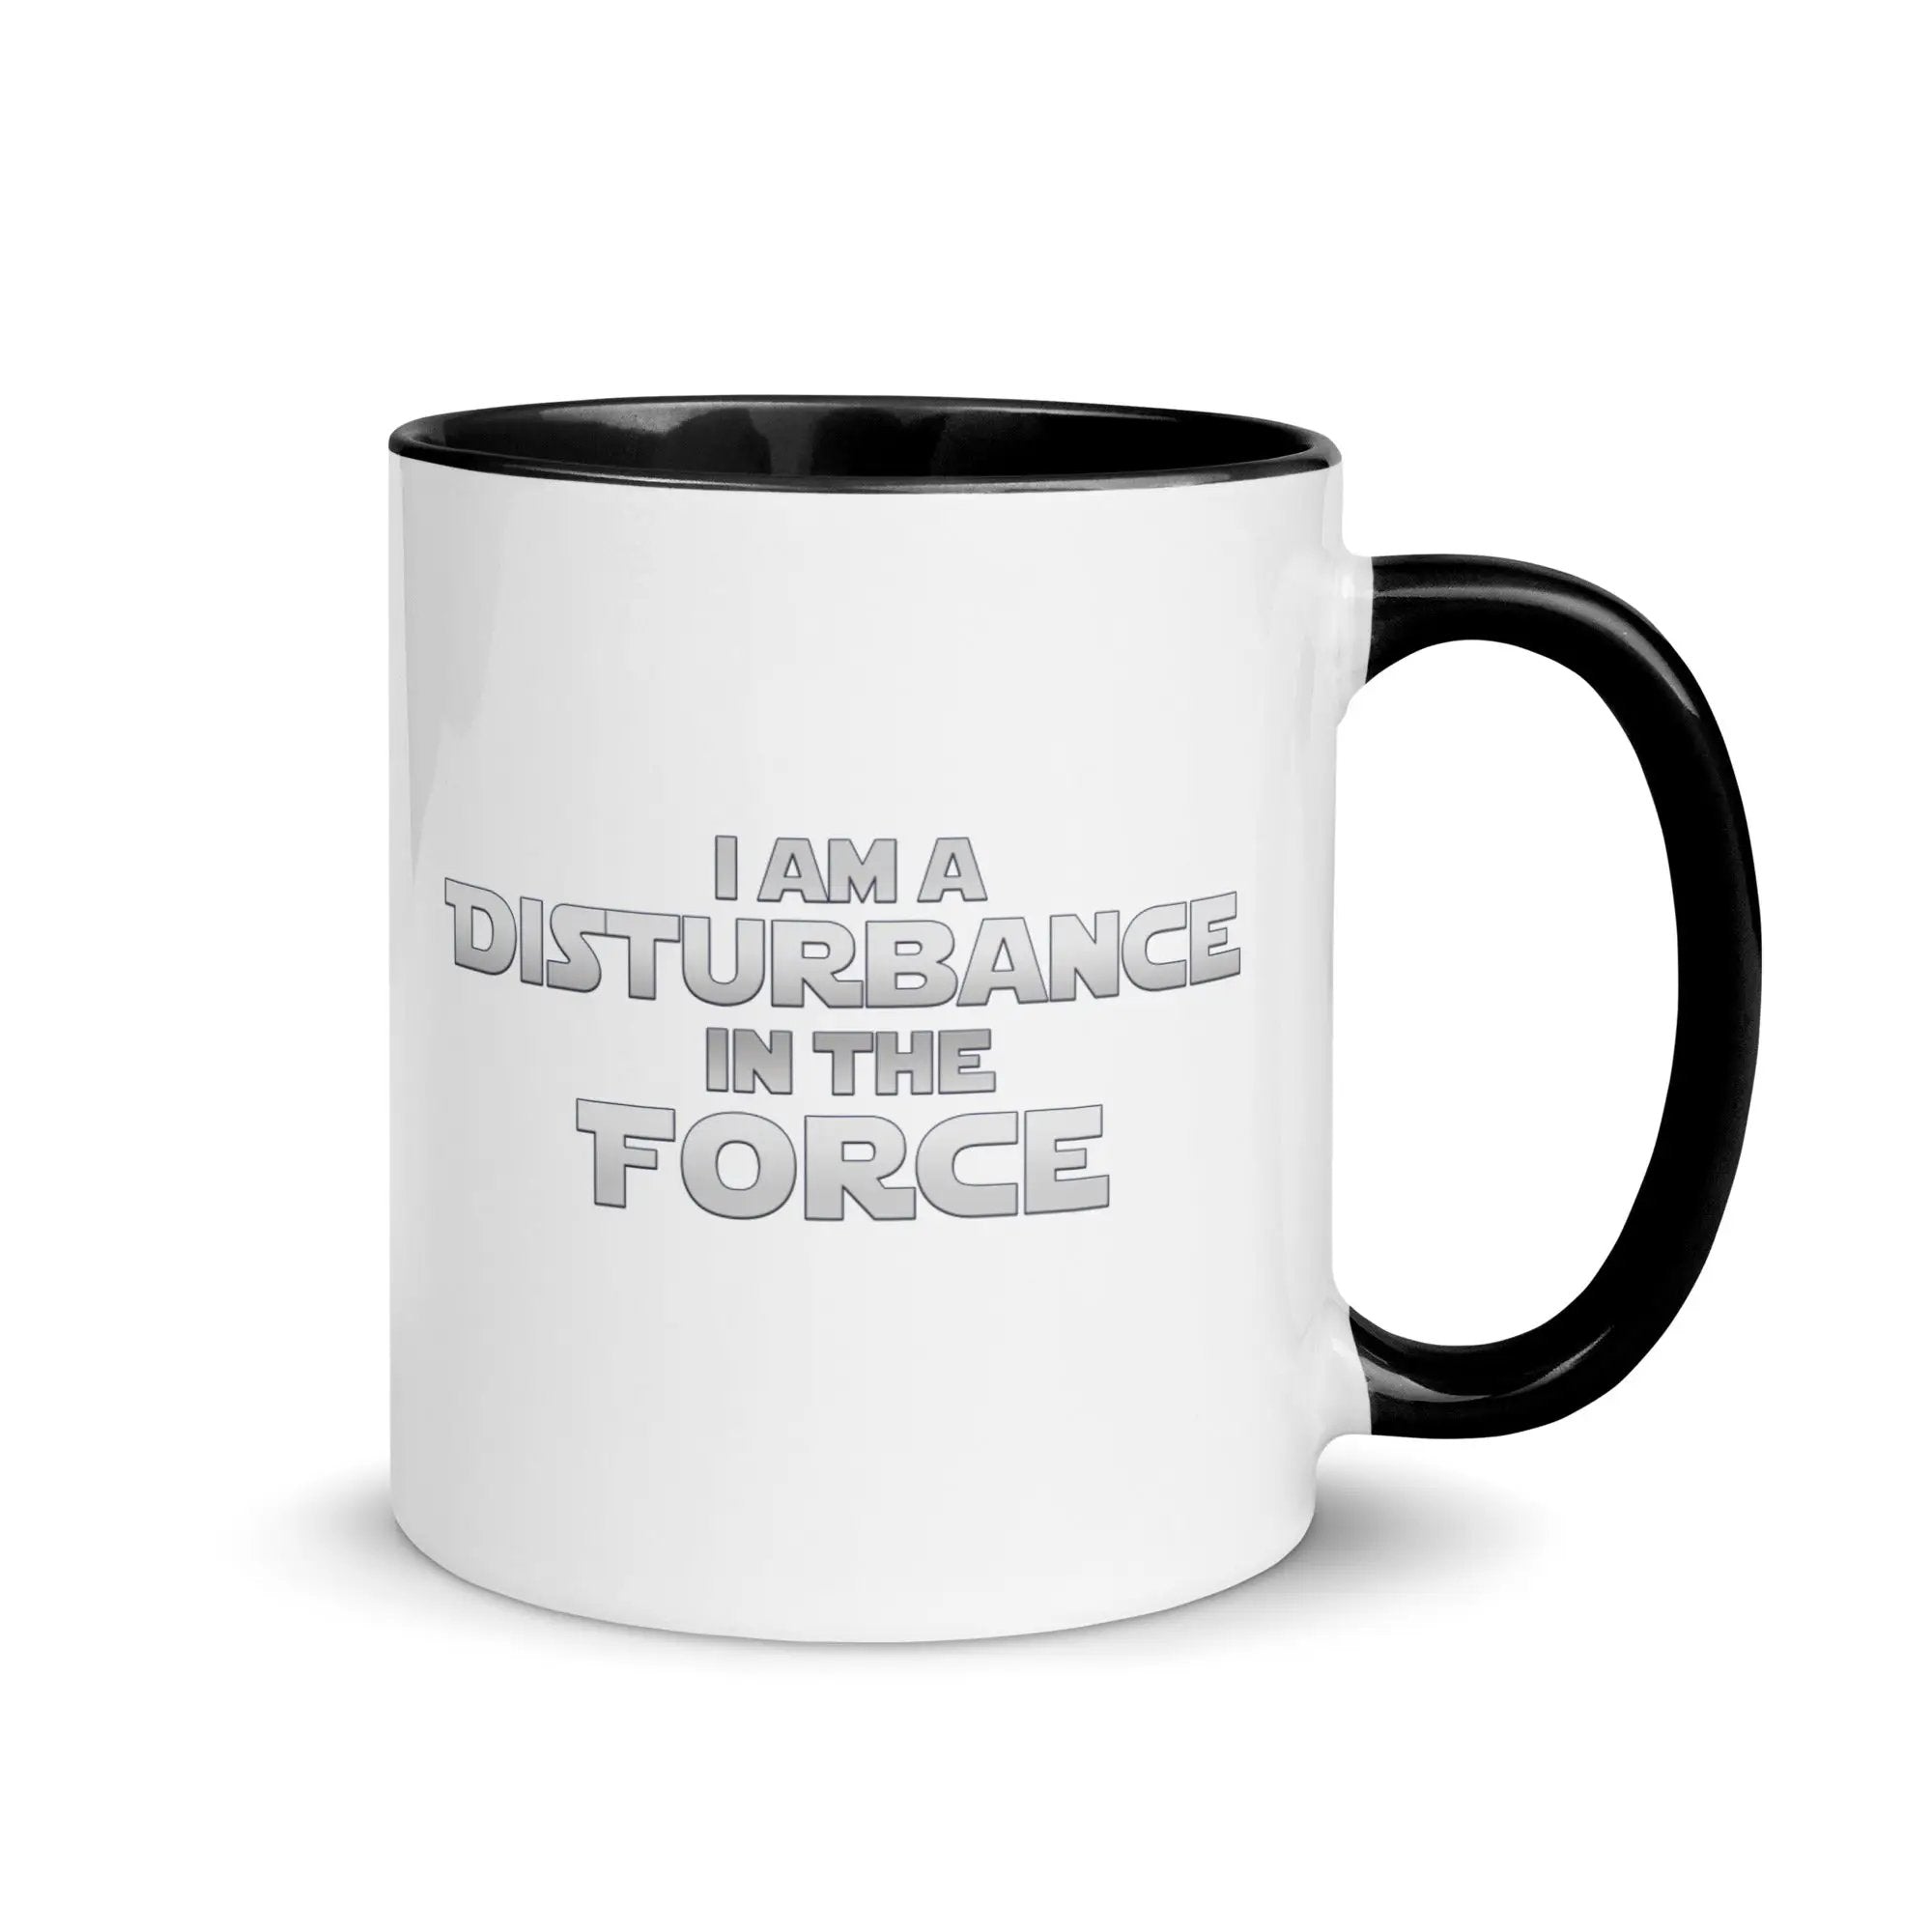 a black and white coffee mug with the words i am a distance in the force